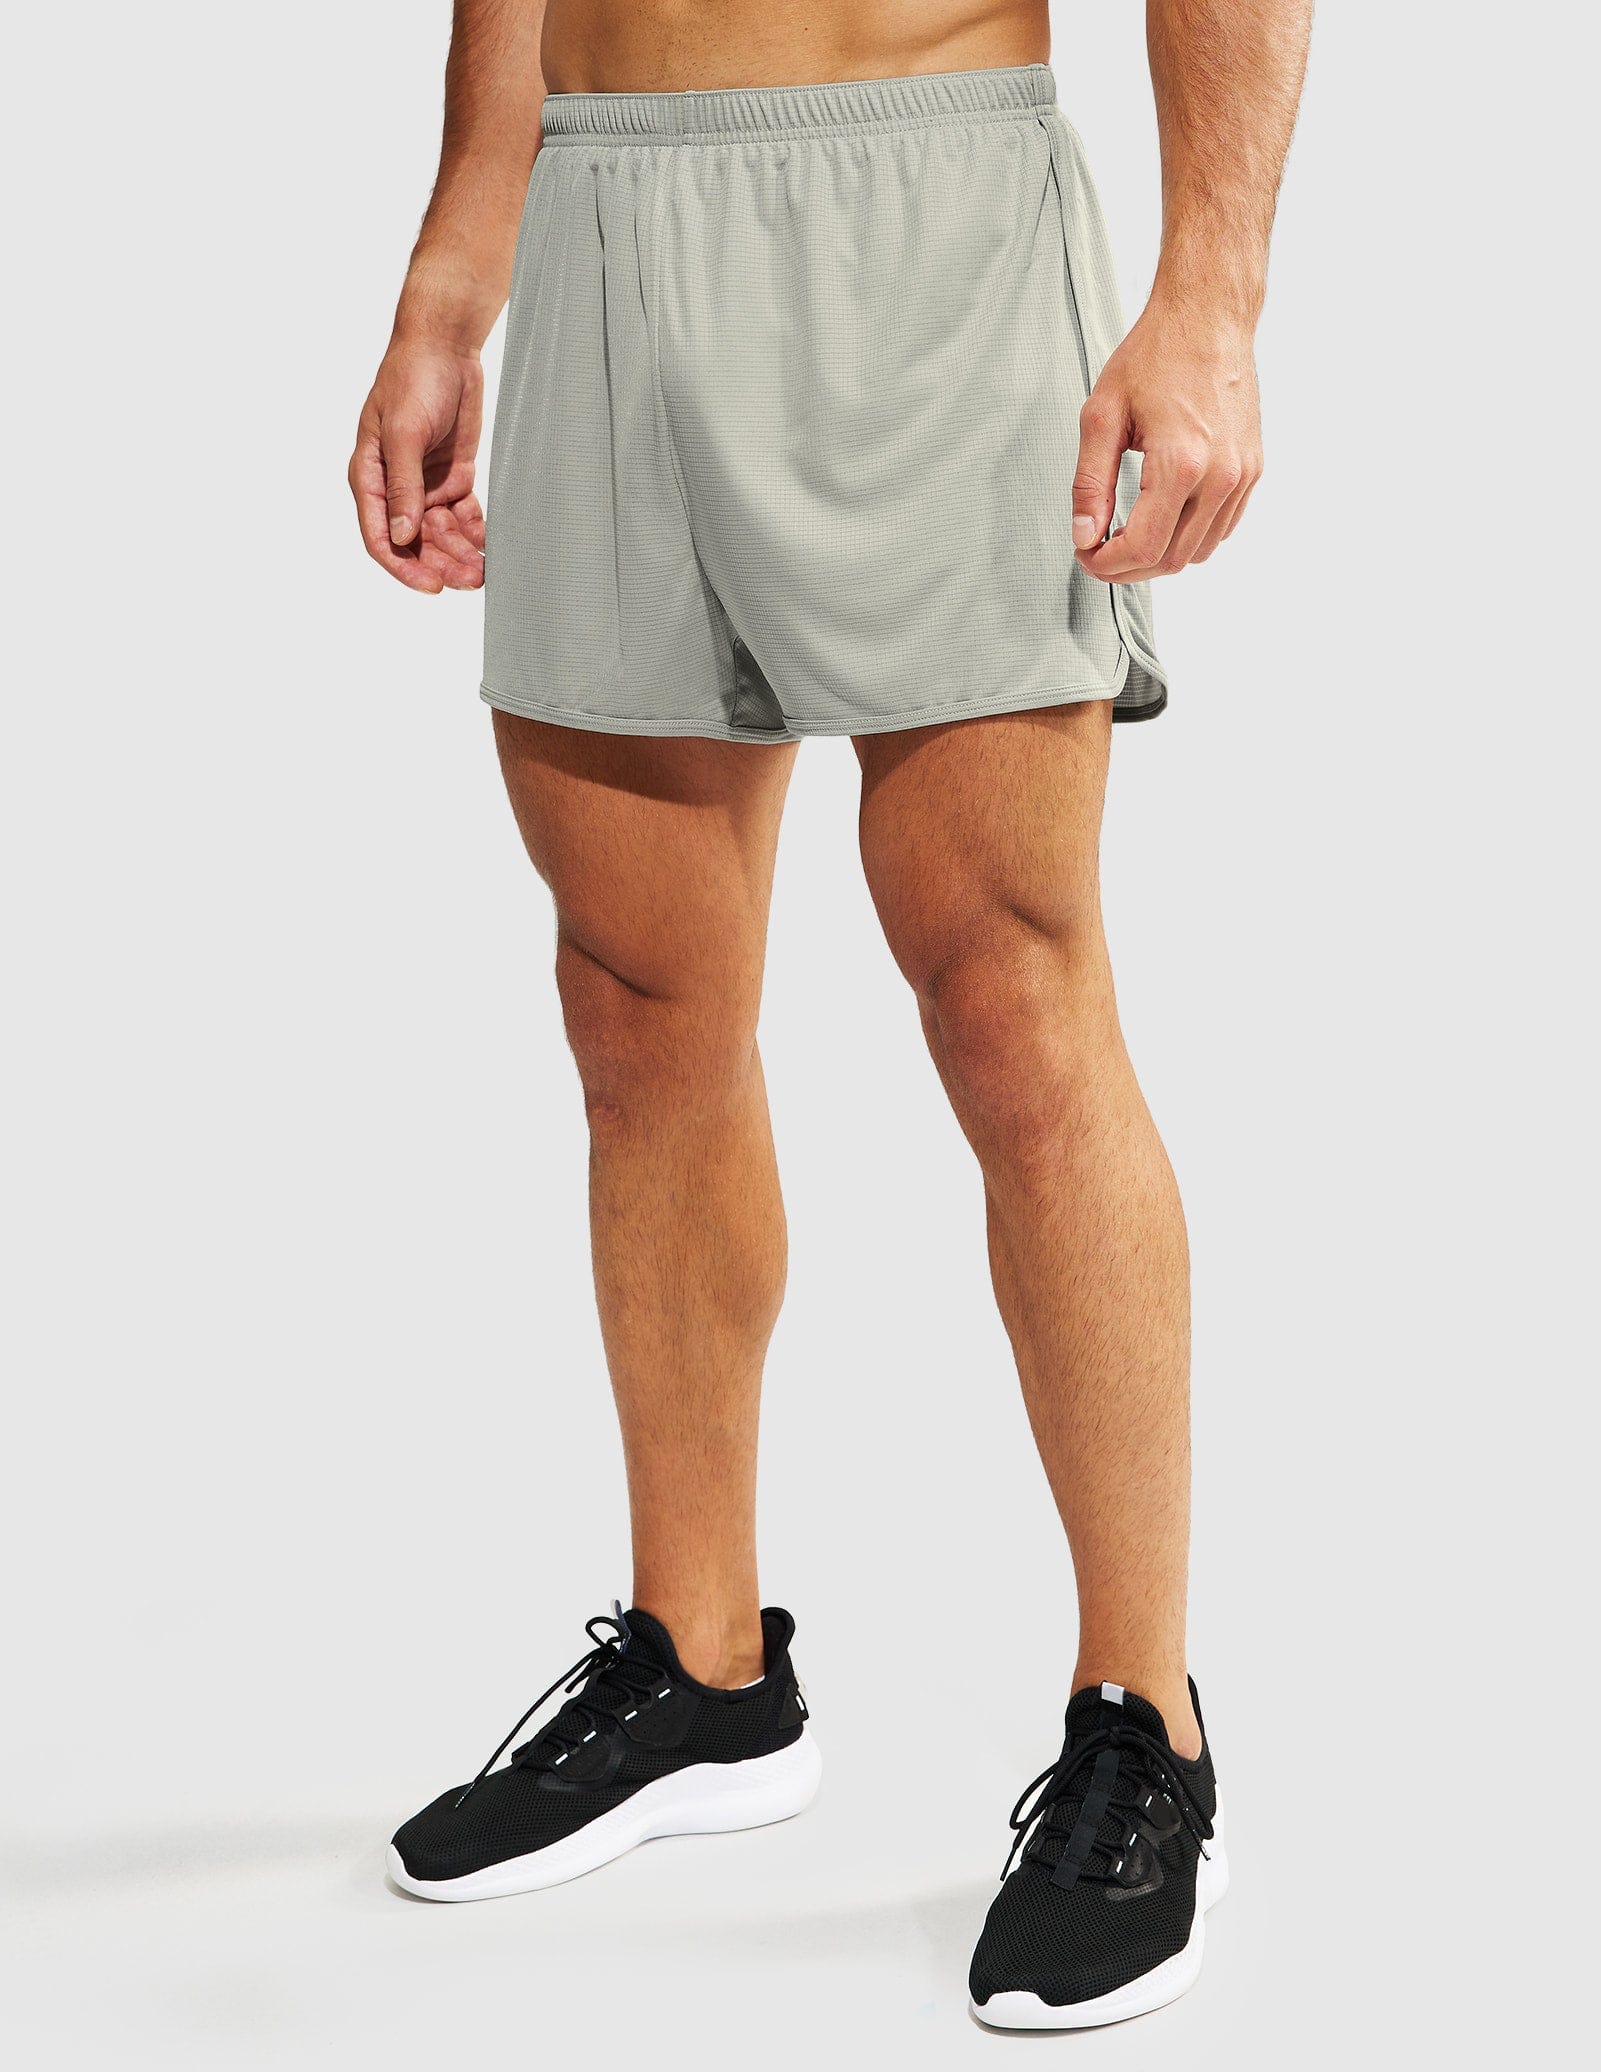 Men's 3-Inch Quick Dry Running Shorts with Liner Men's Shorts Light Grey / XS MIER